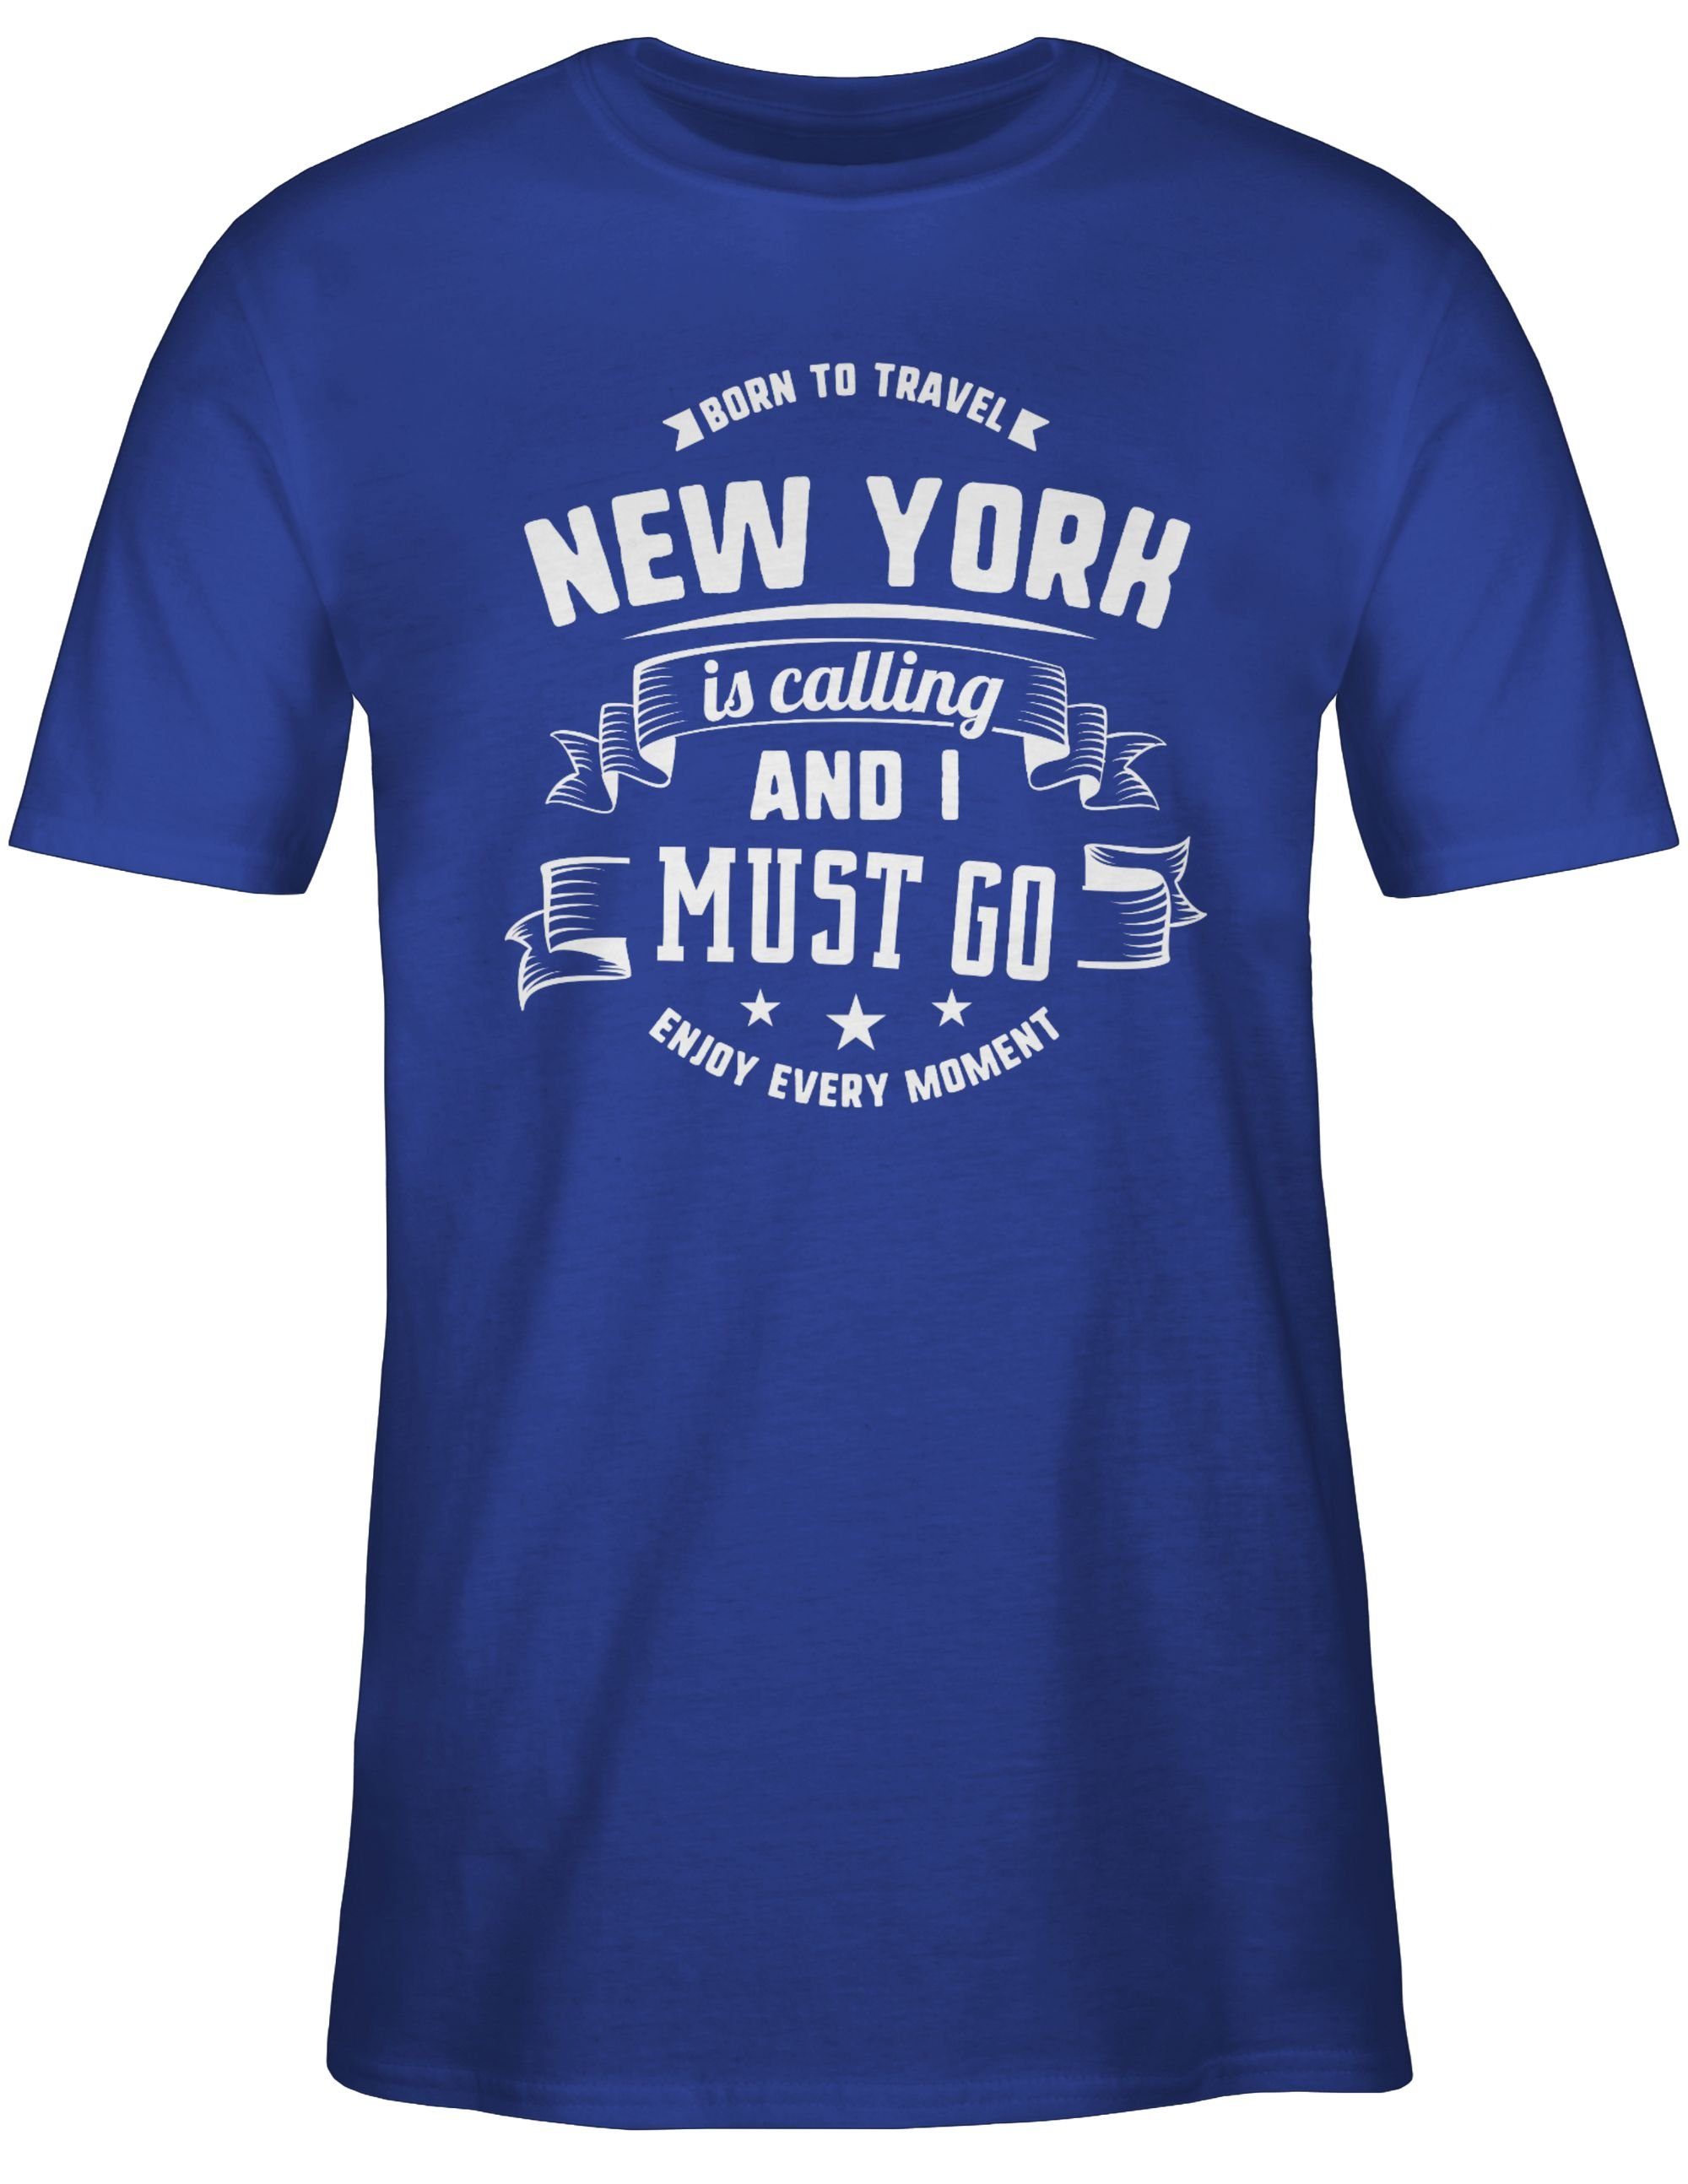 Weiß Outfit I Stadt Shirtracer go is and 03 und must calling City New T-Shirt Royalblau York